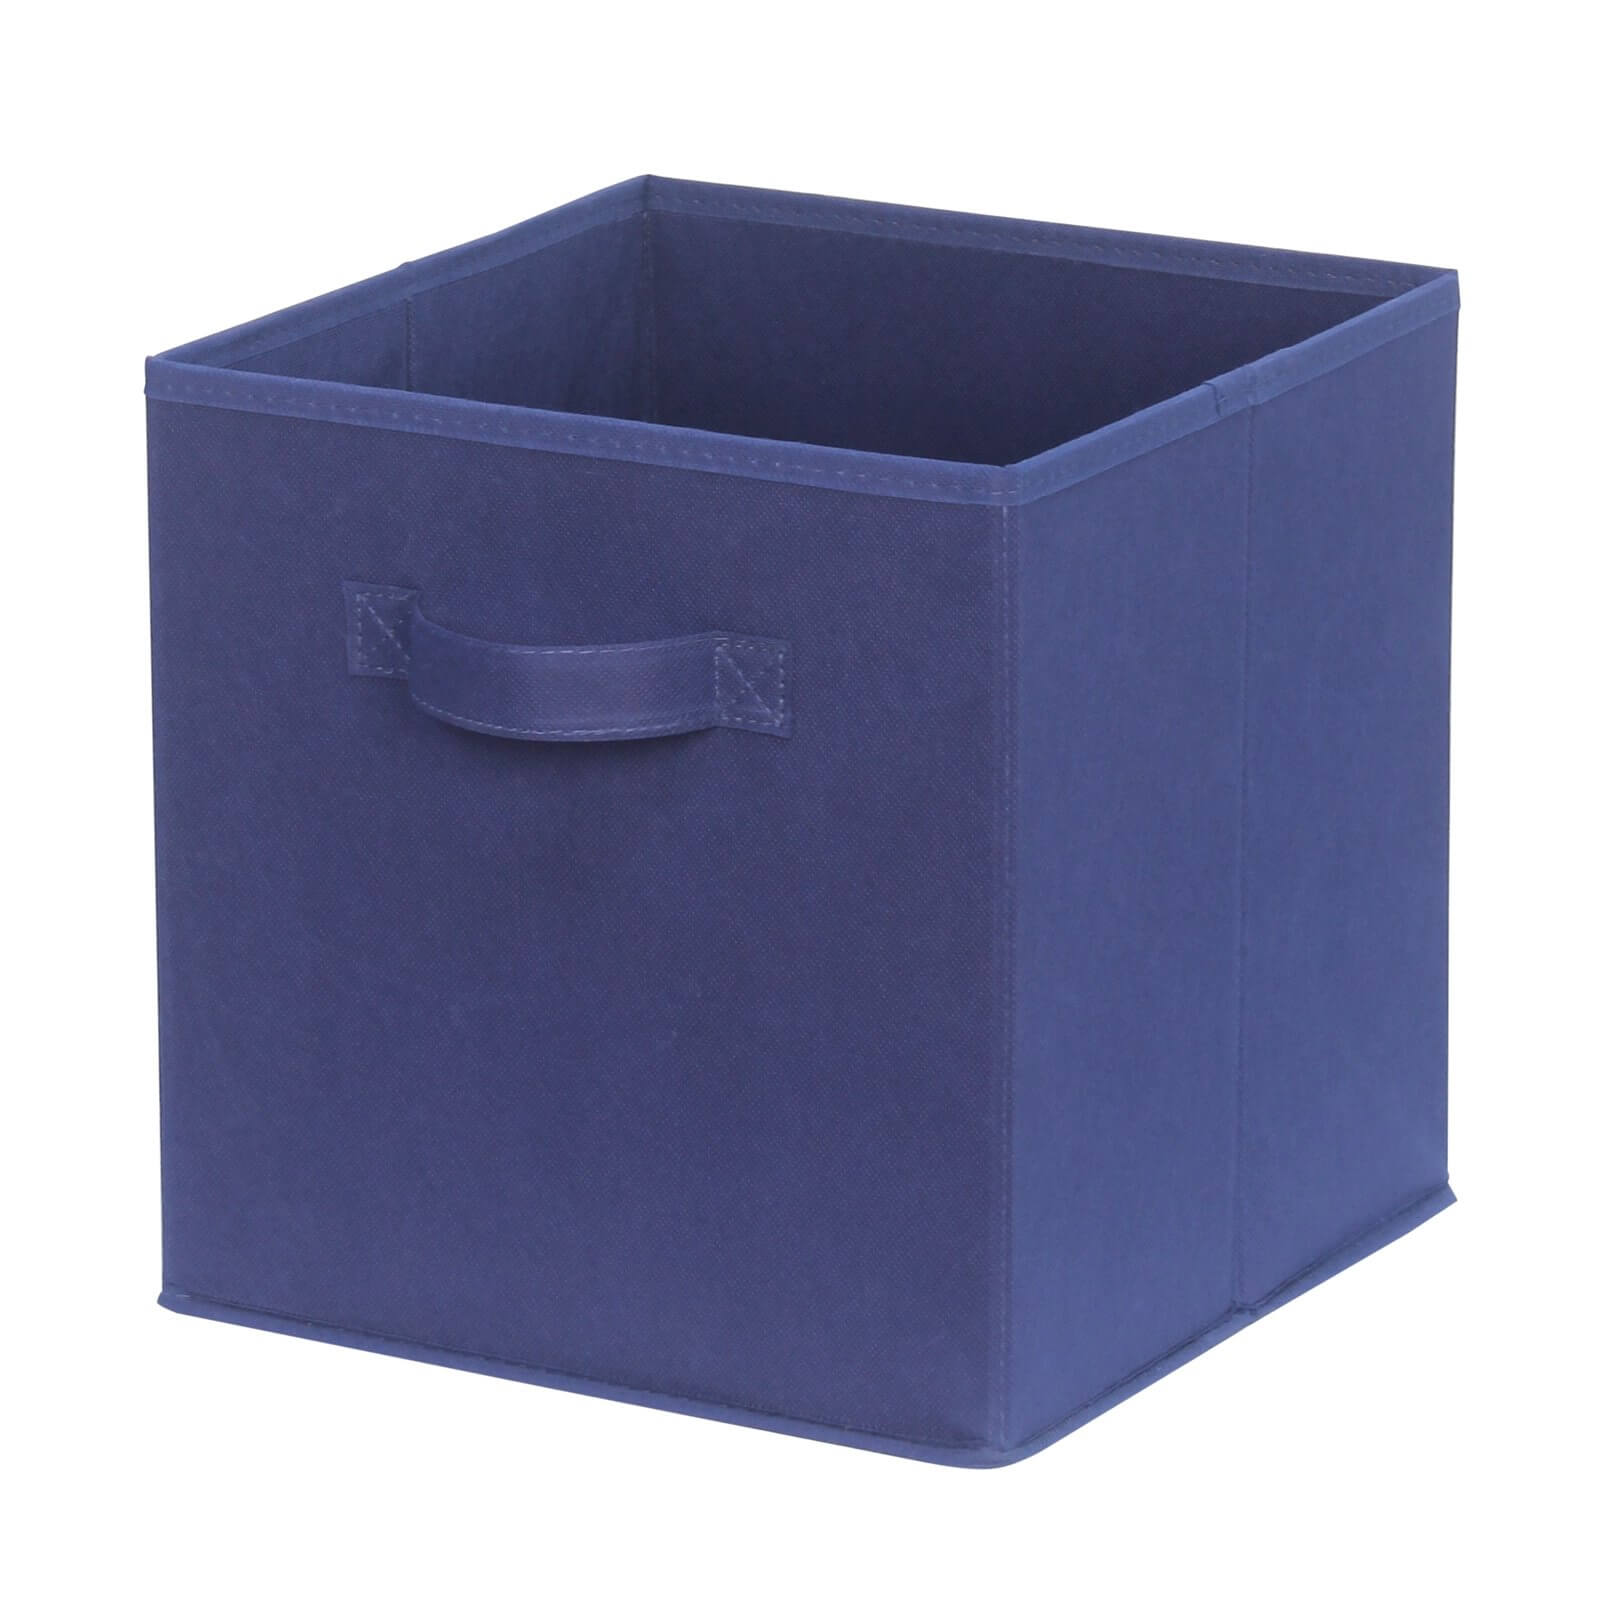 Photo of Compact Cube Fabric Insert - Navy Blue